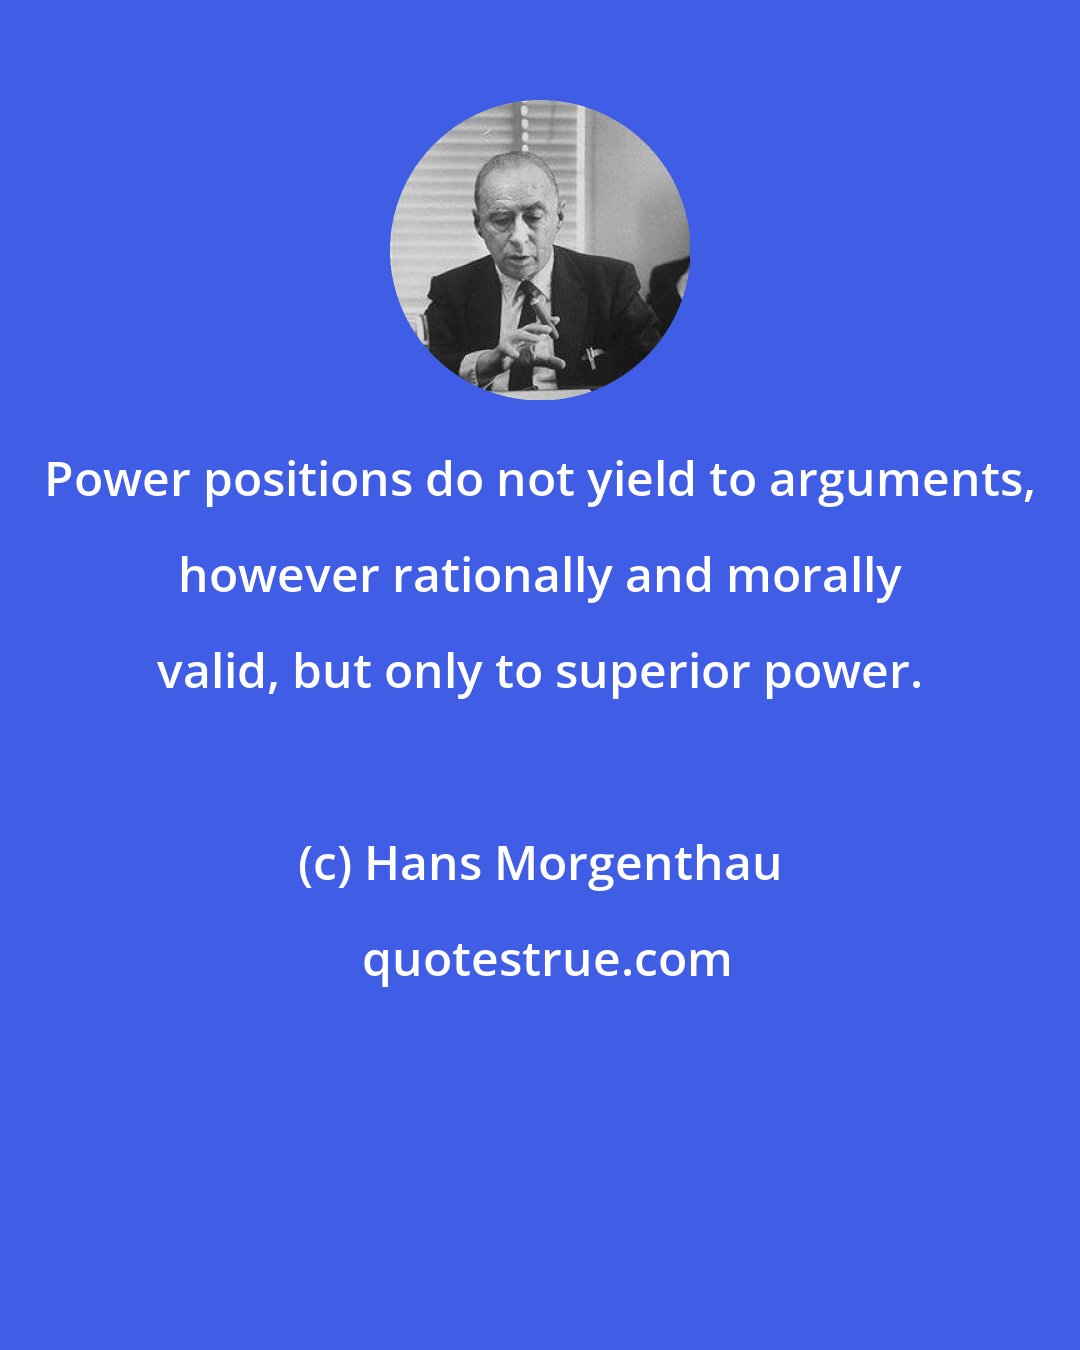 Hans Morgenthau: Power positions do not yield to arguments, however rationally and morally valid, but only to superior power.